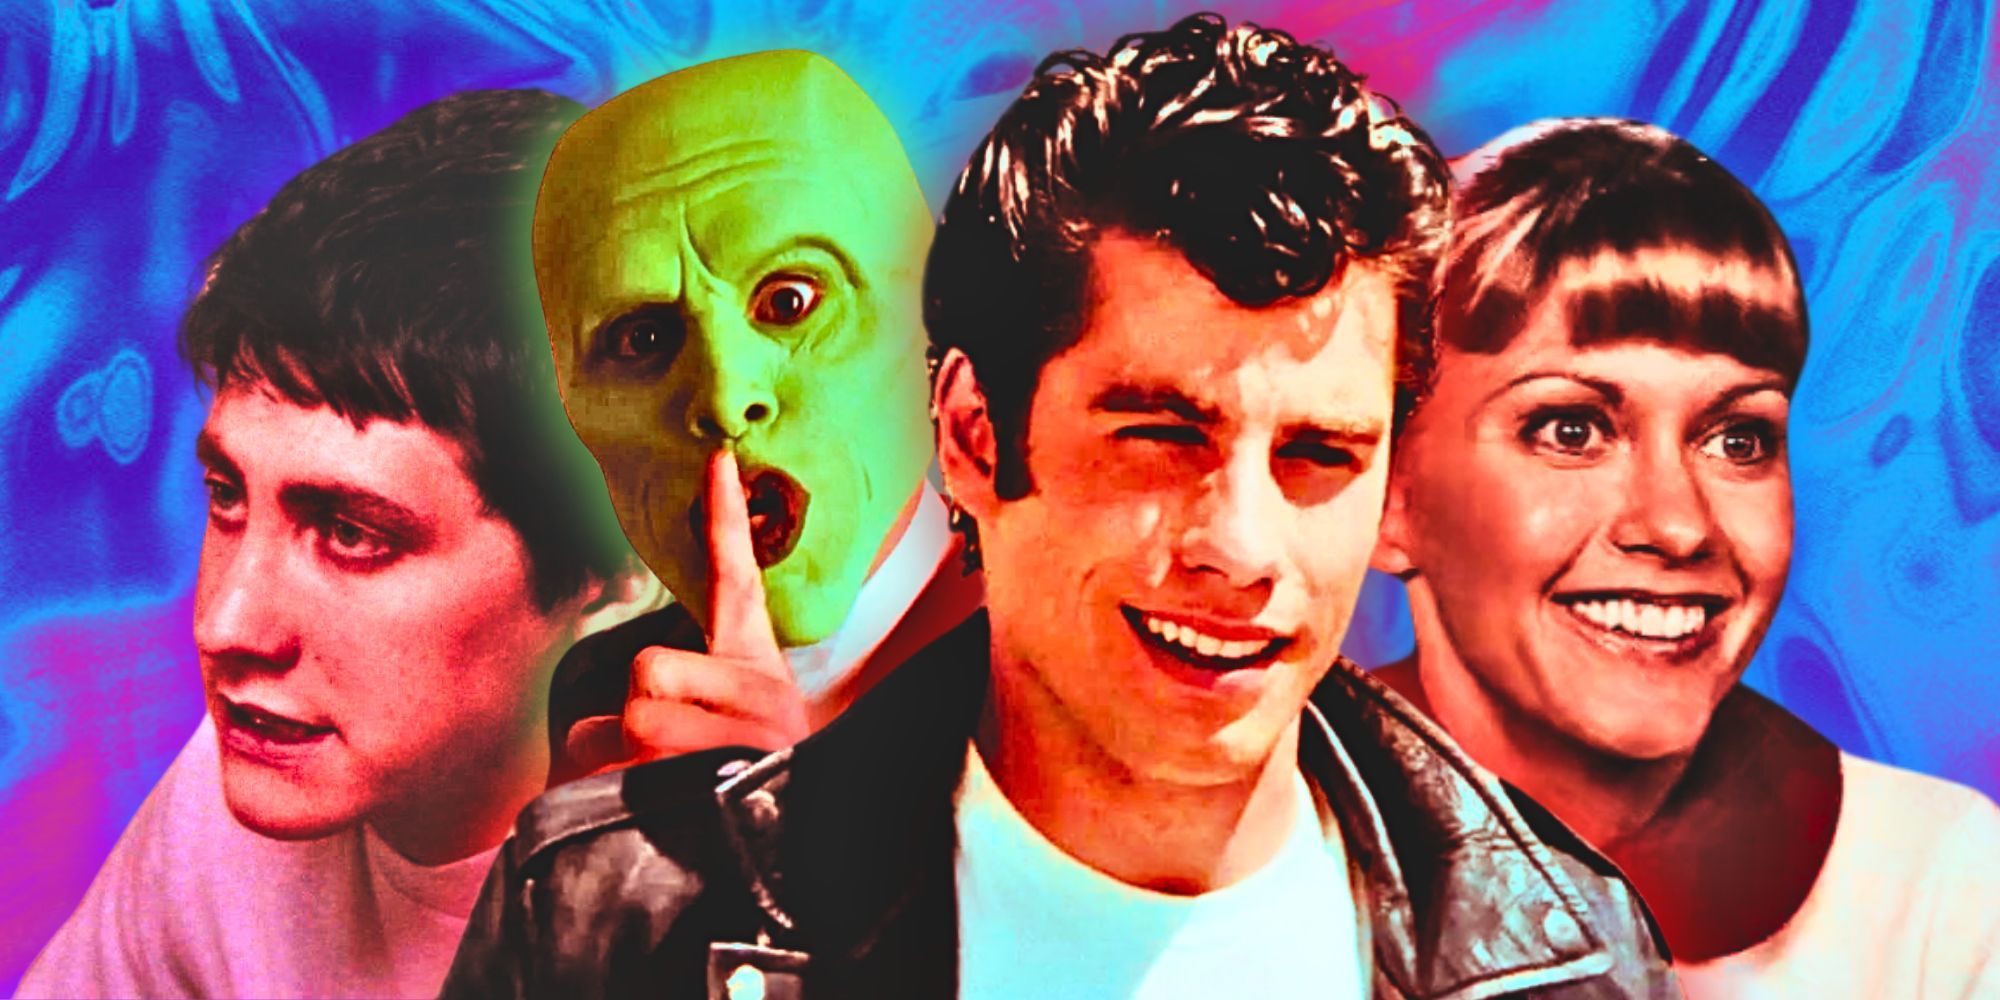 Donnie Darko, The Mask, and Danny and Sandy from Grease